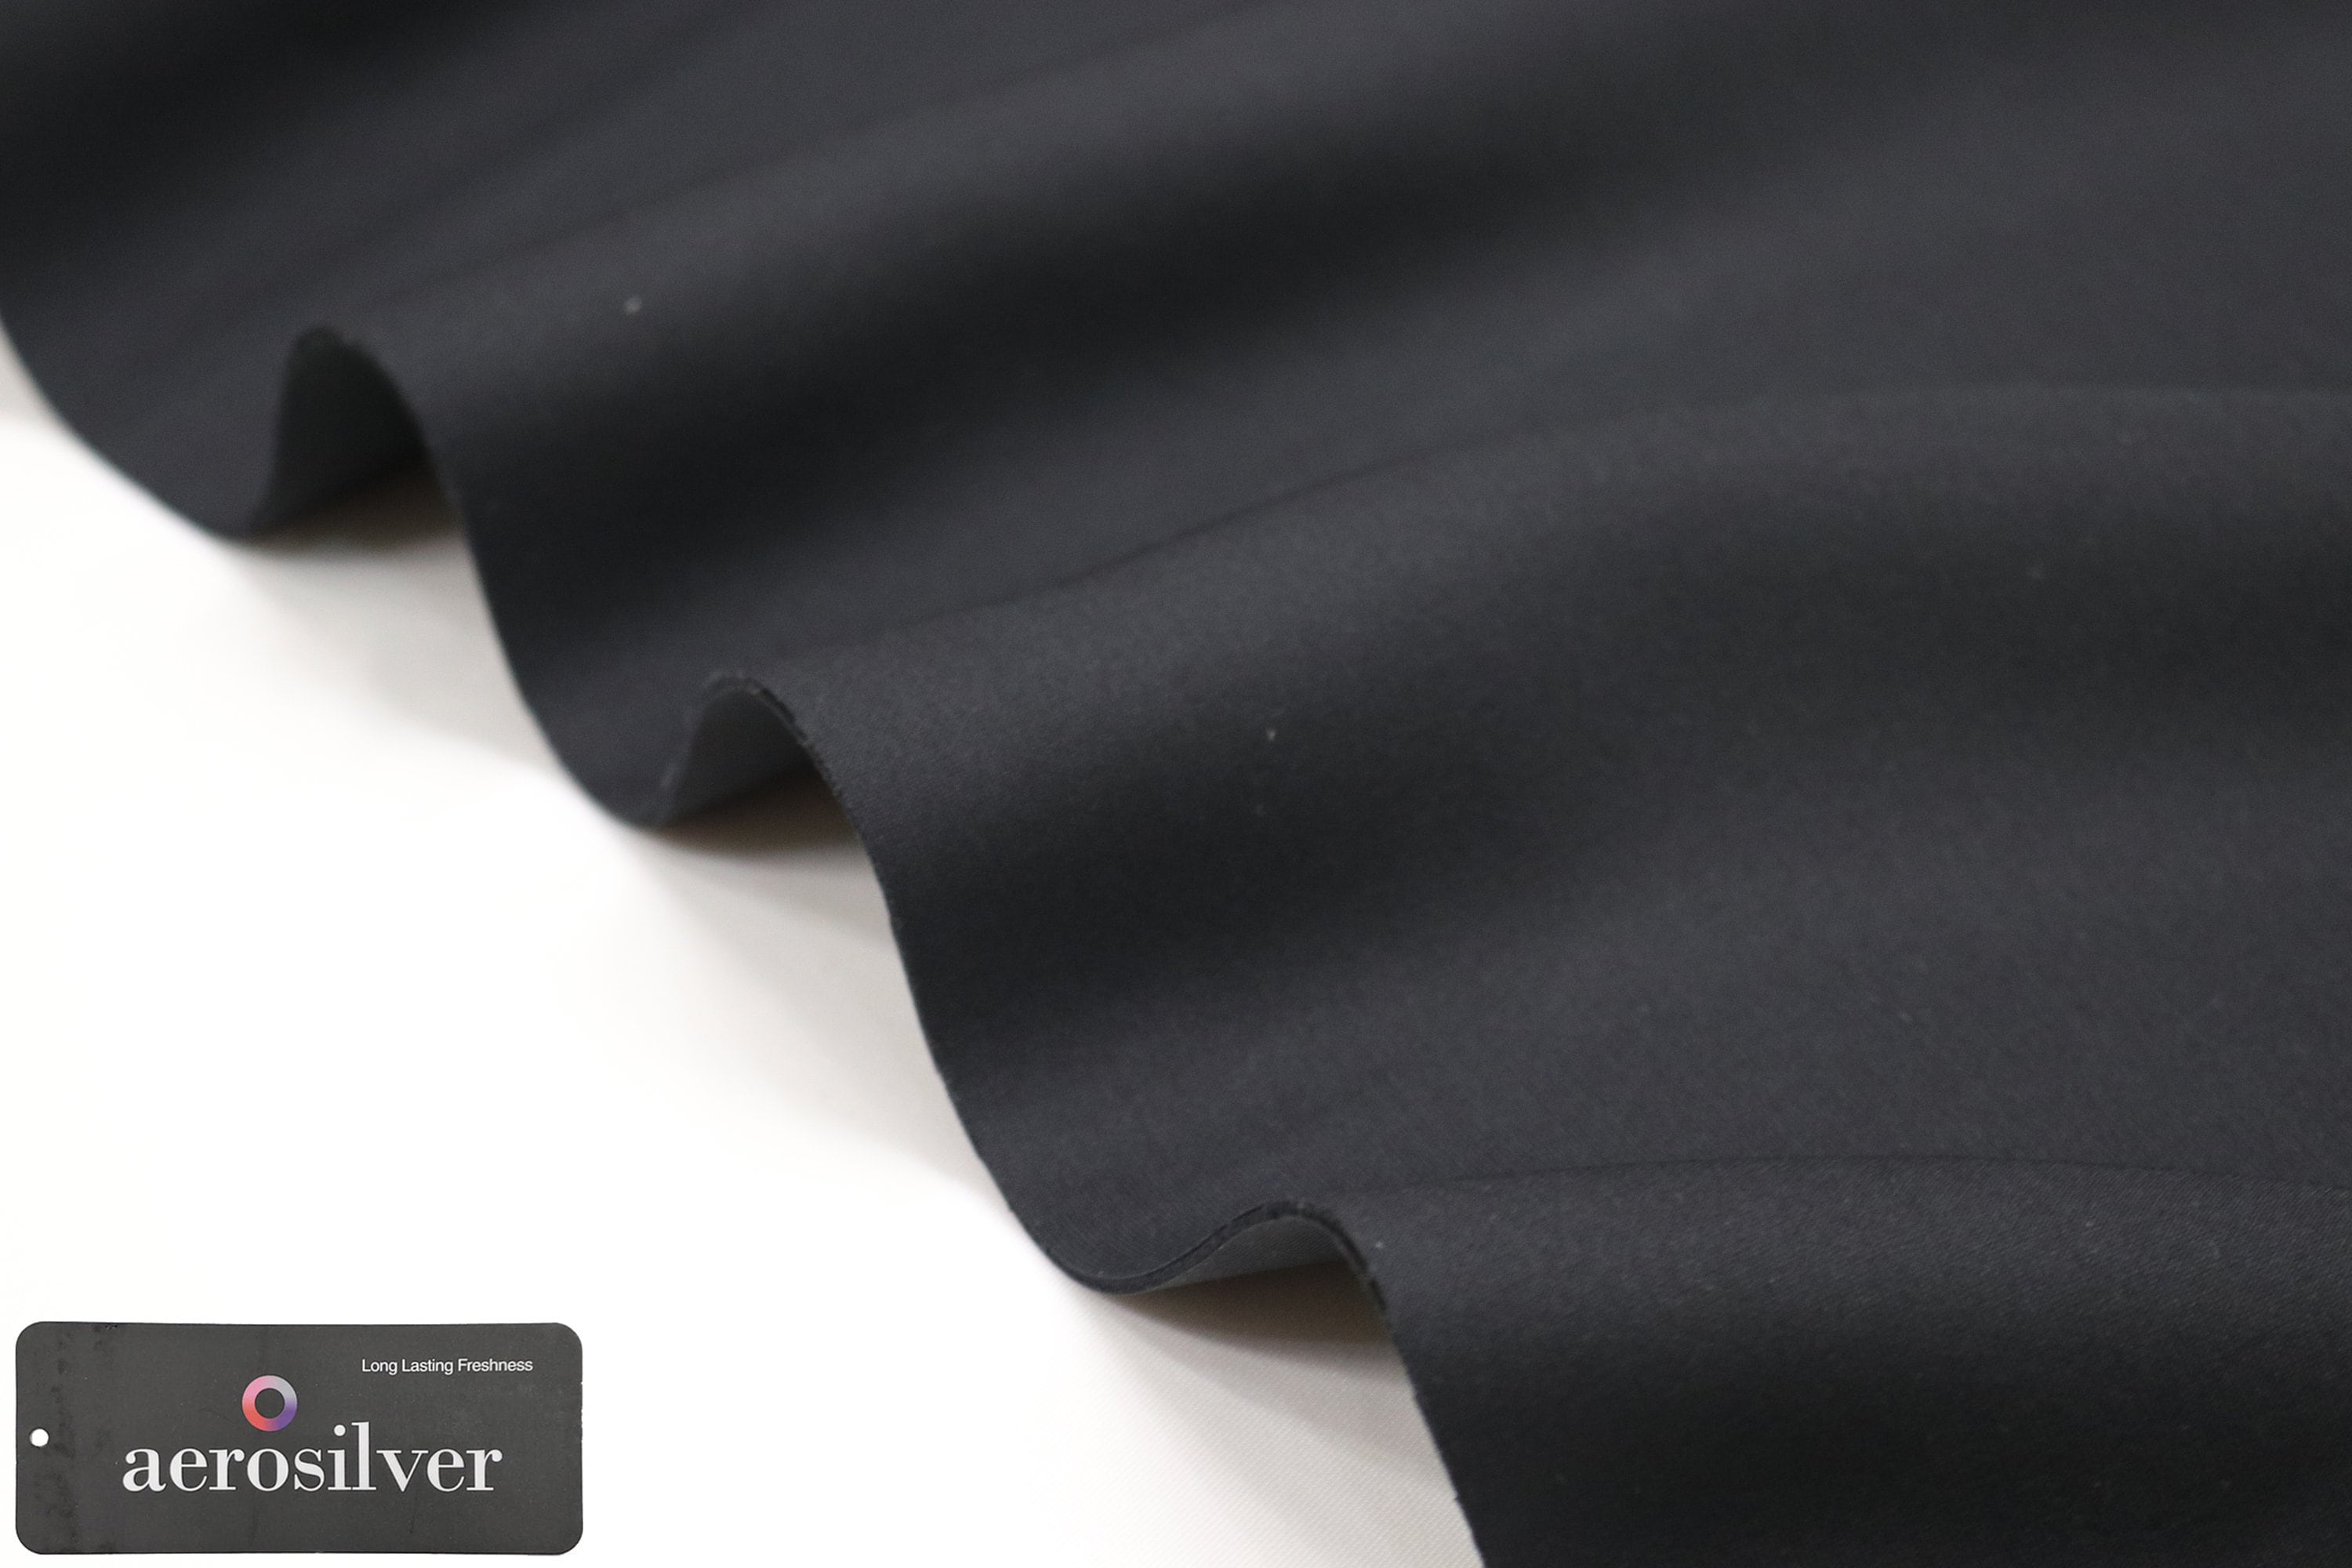 Neoprene FABRIC by the Yard, 1.5mm Anti-microbial Odor-preventing Quick-dry  Uv-protection Breathable , 58-60 Wide 